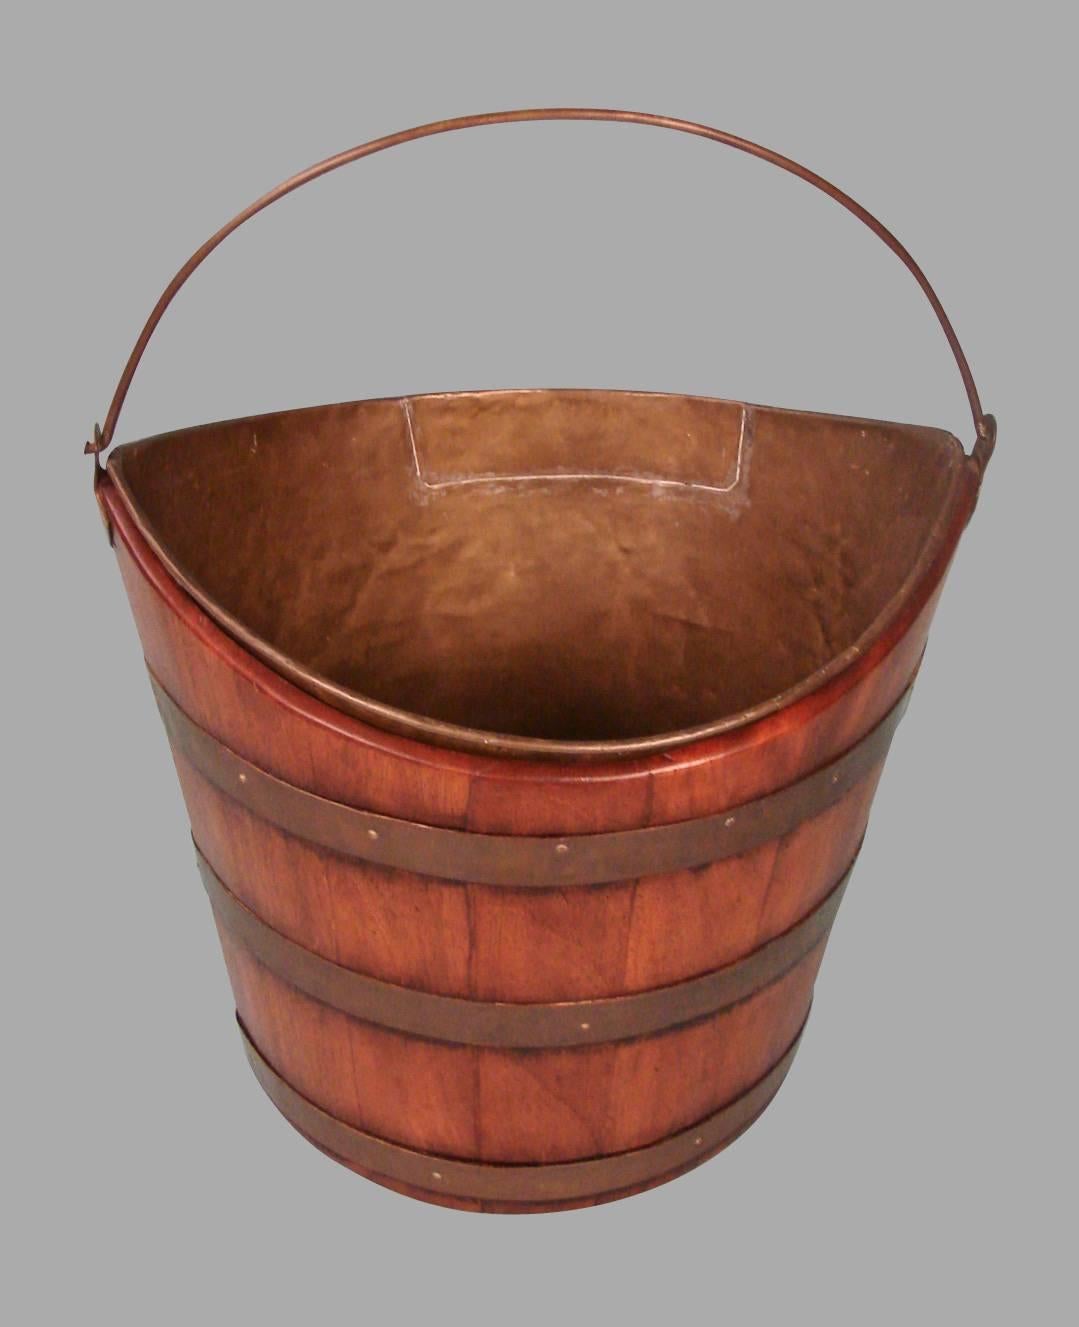 A Regency period mahogany brass-bound peat bucket, the coopered tapering body of navette form complete with a brass liner and handle, circa 1820.